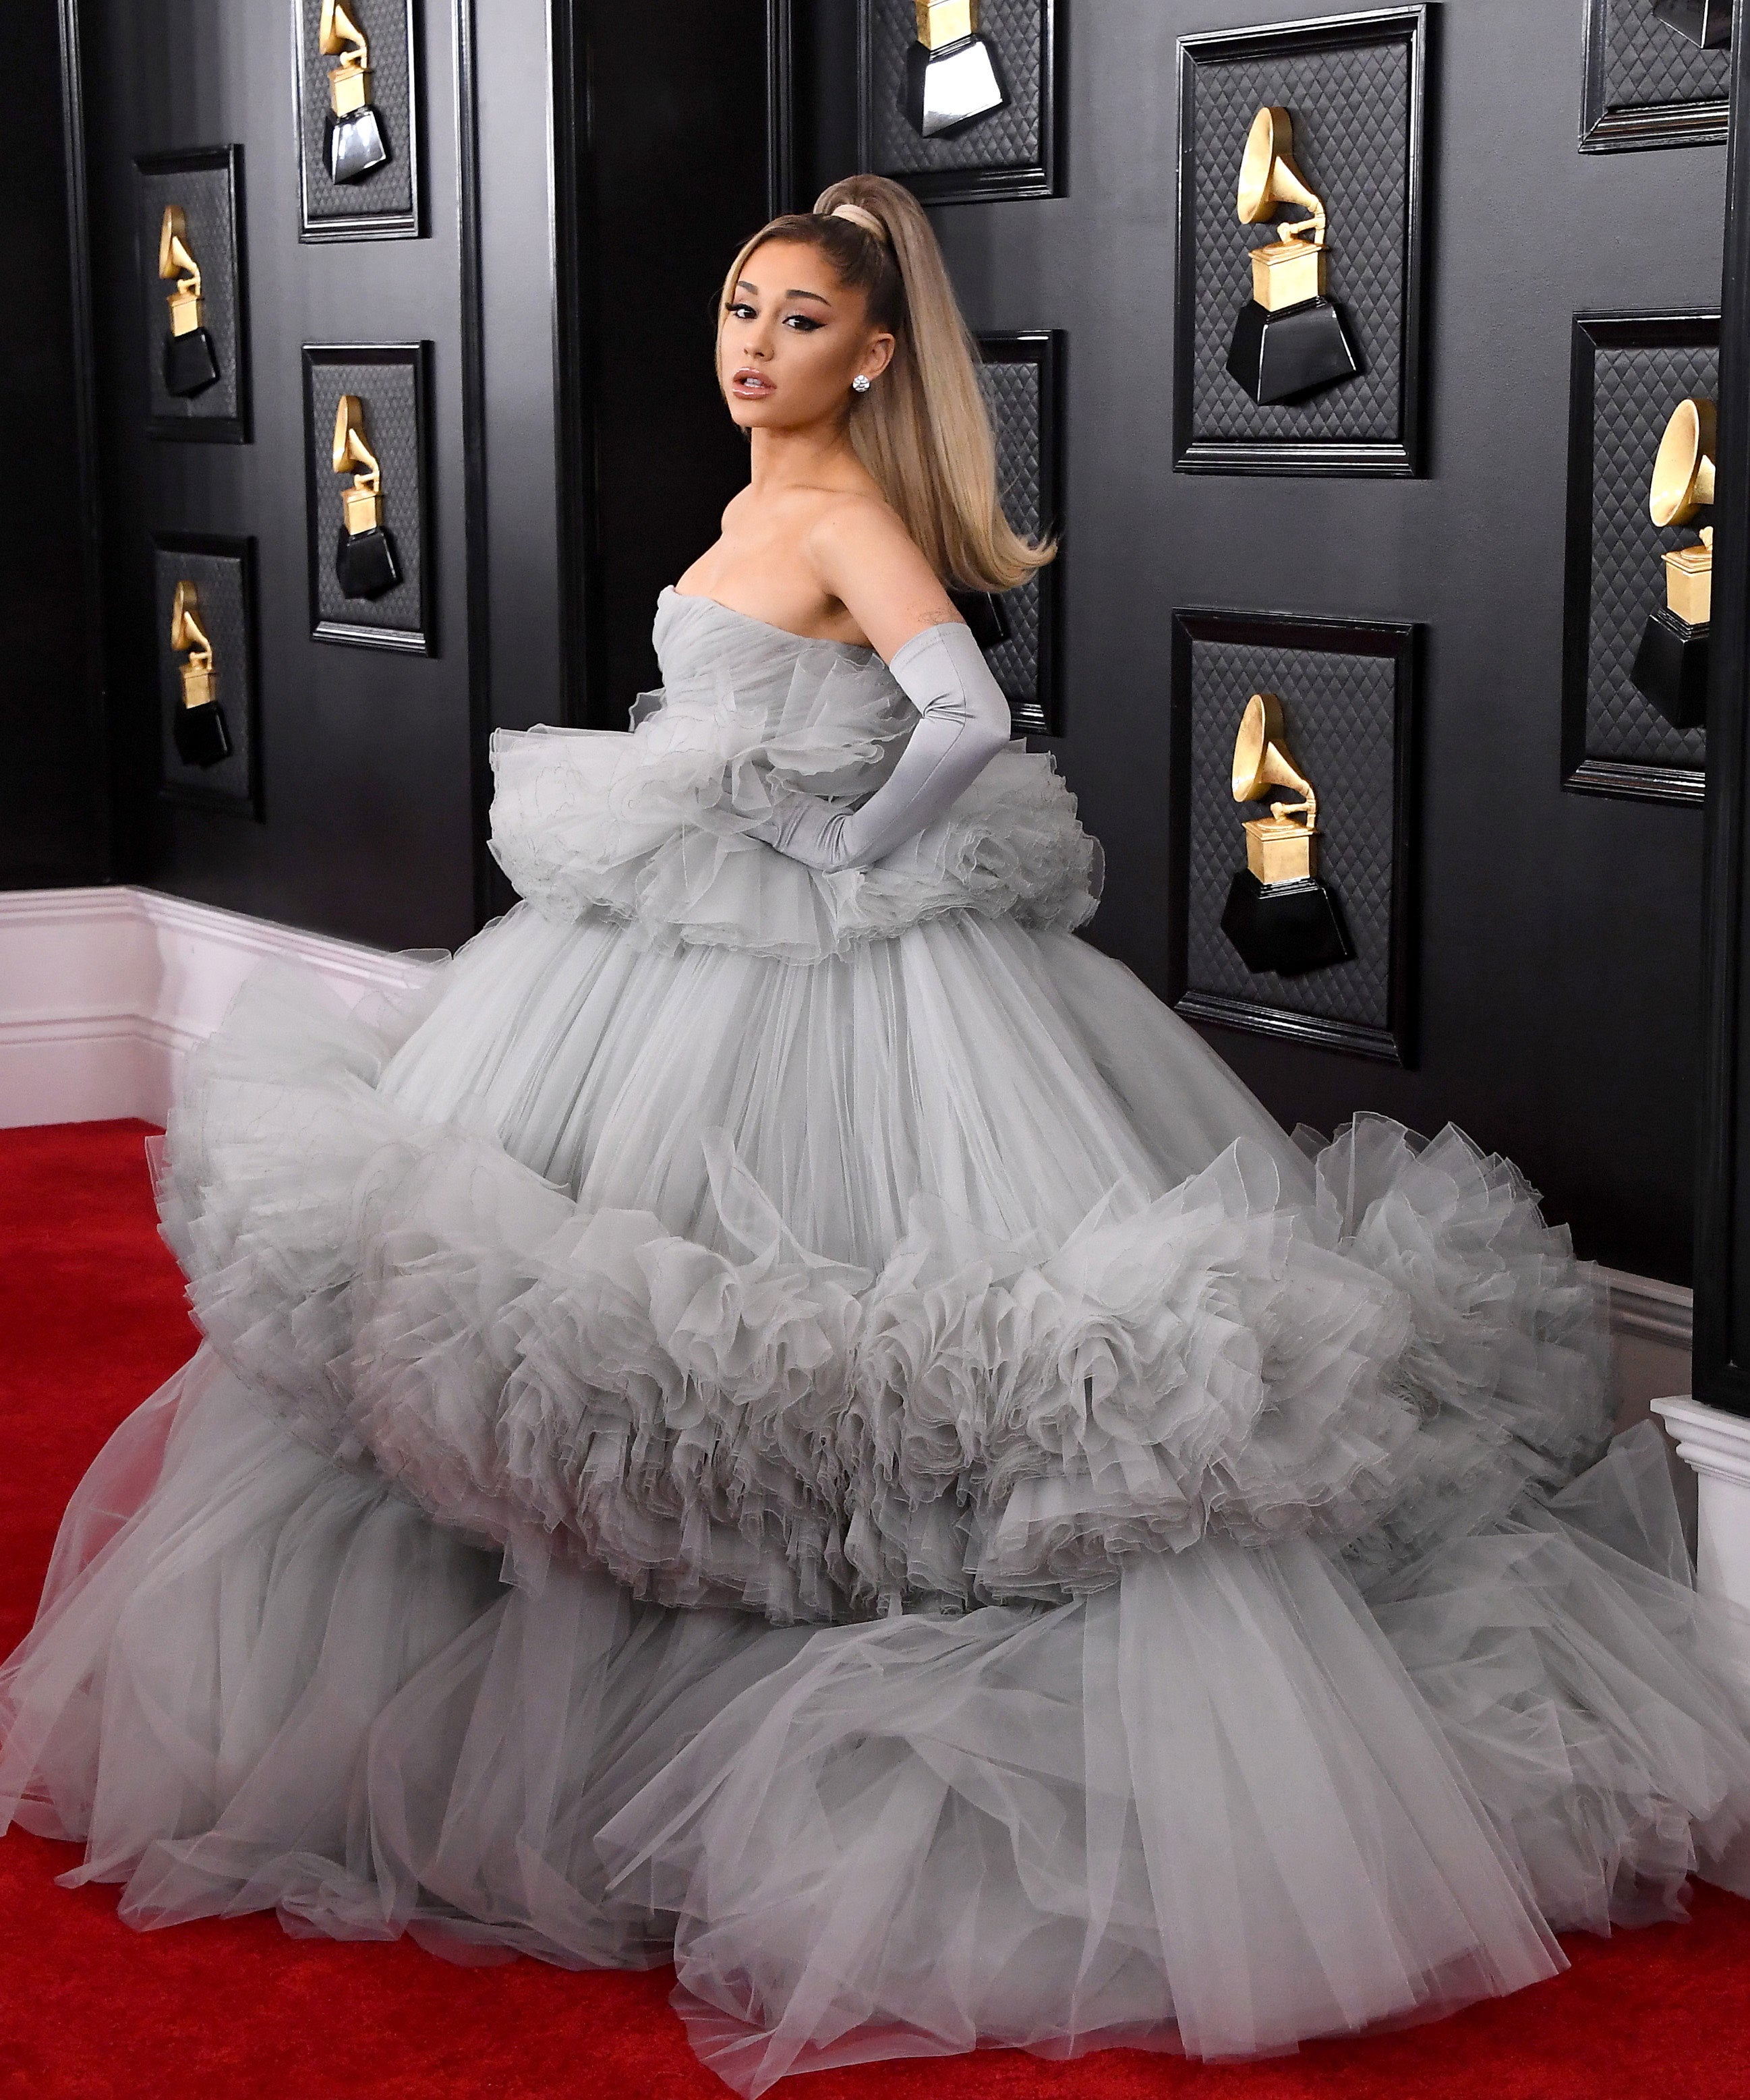 Ariana Grande Wore Two Looks on the Grammys 2020 Red Carpet | Vogue